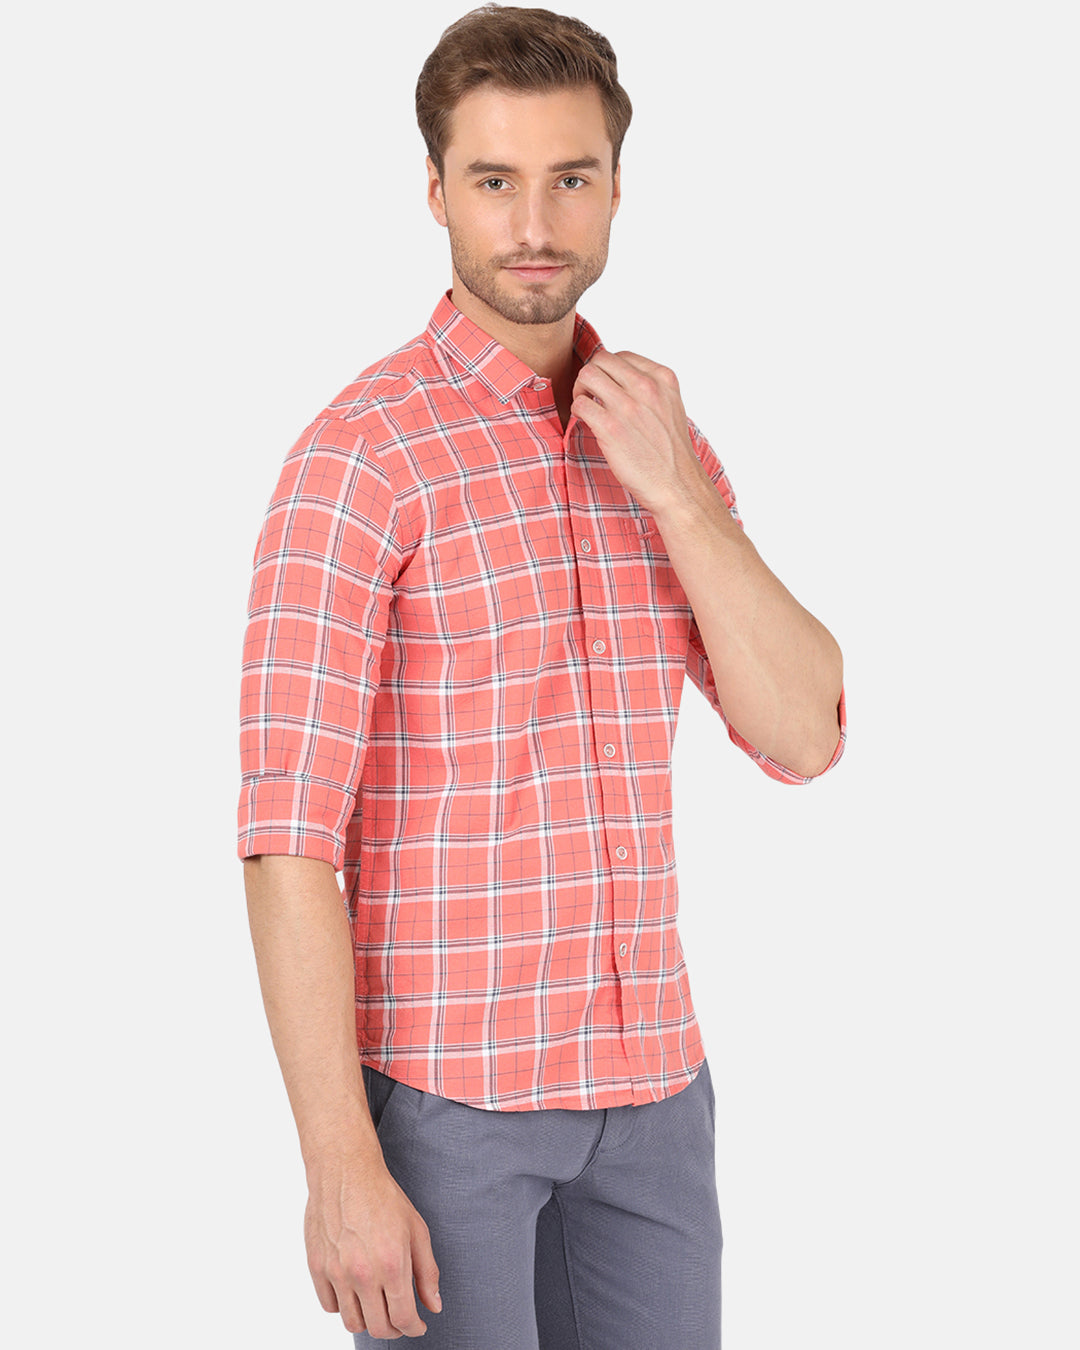 Crocodile Men's Casual Full Sleeve Slim Fit Checks Pink With Collar Shirt Online